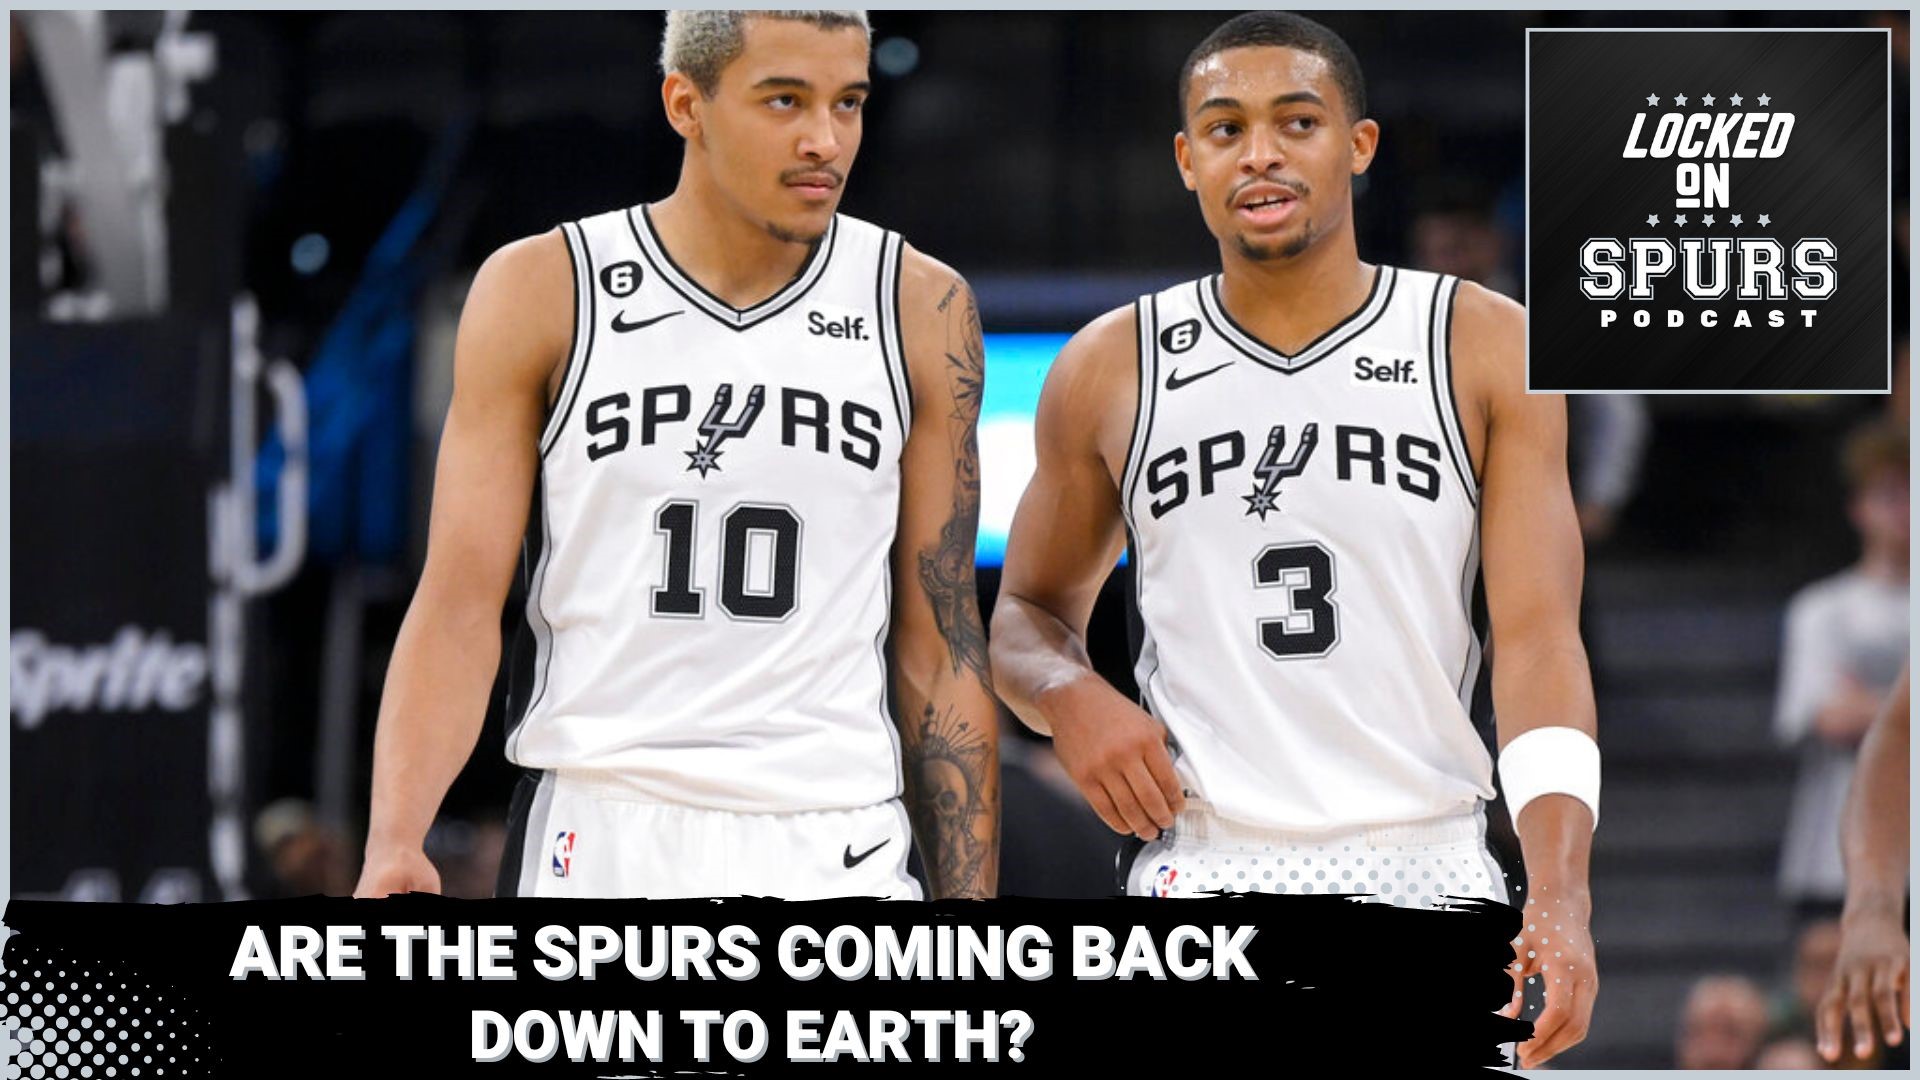 The Spurs are on a five-game losing streak.